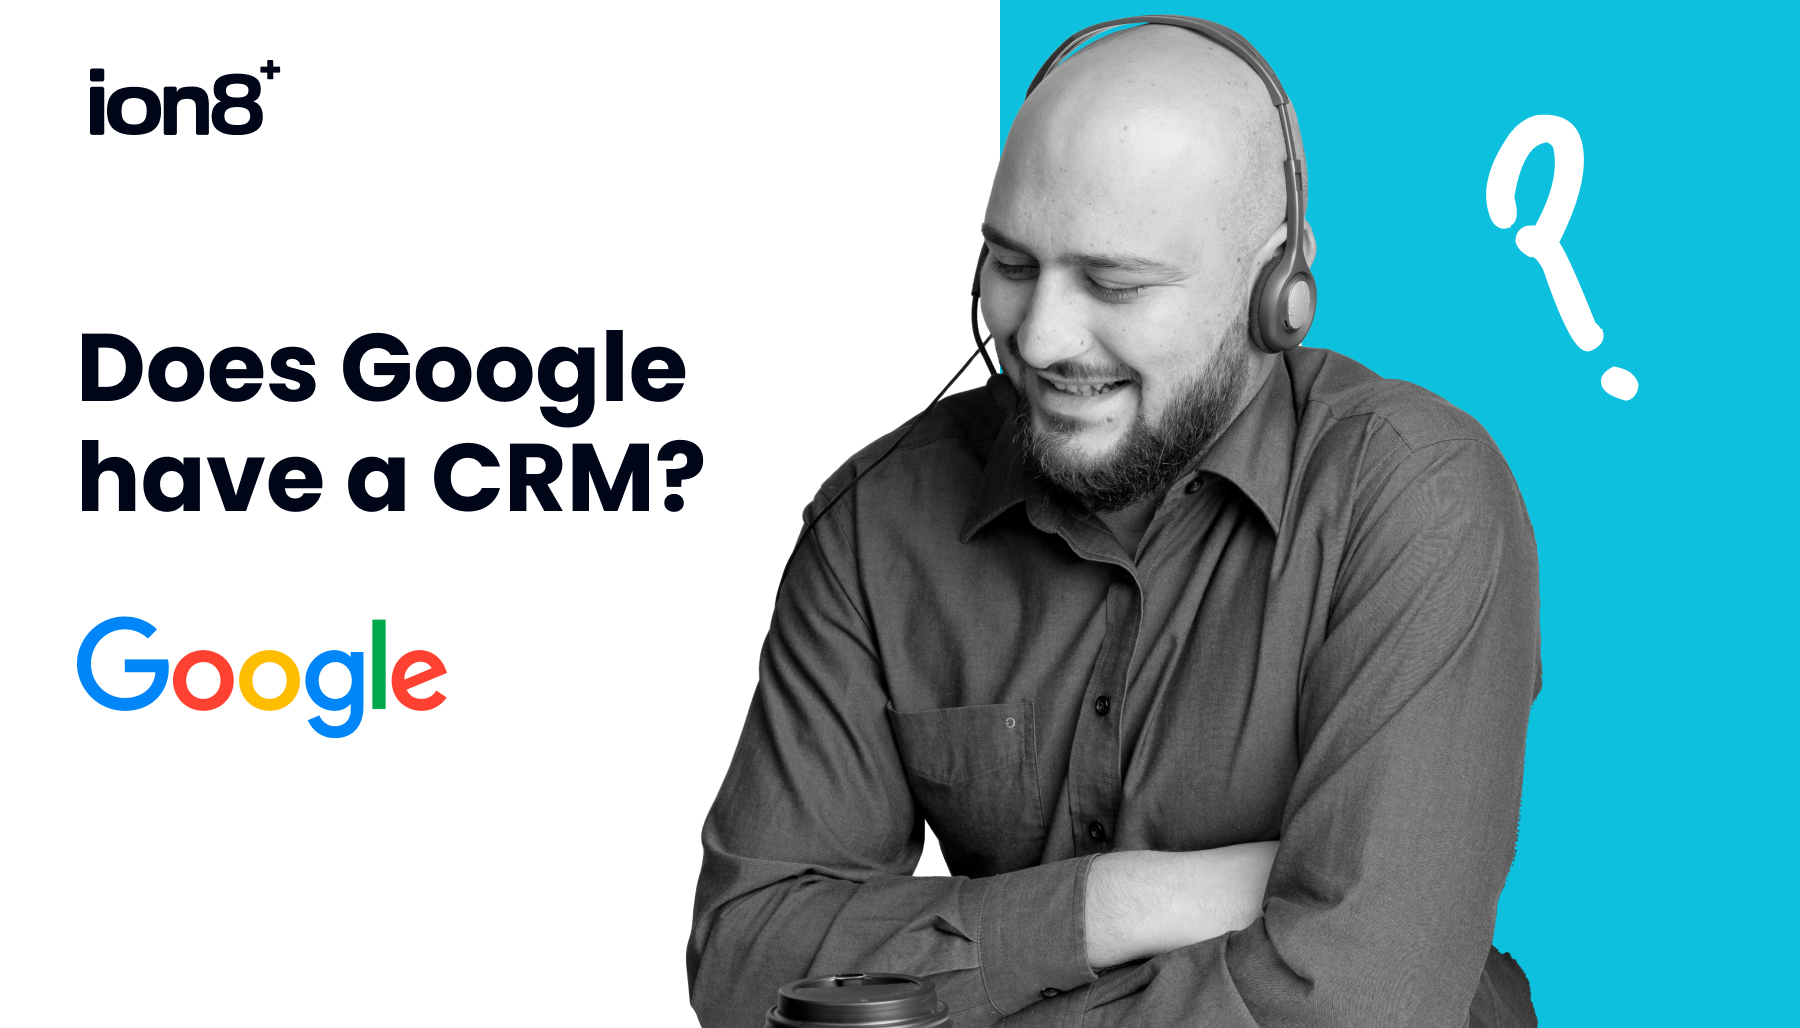 Does Google have a CRM?